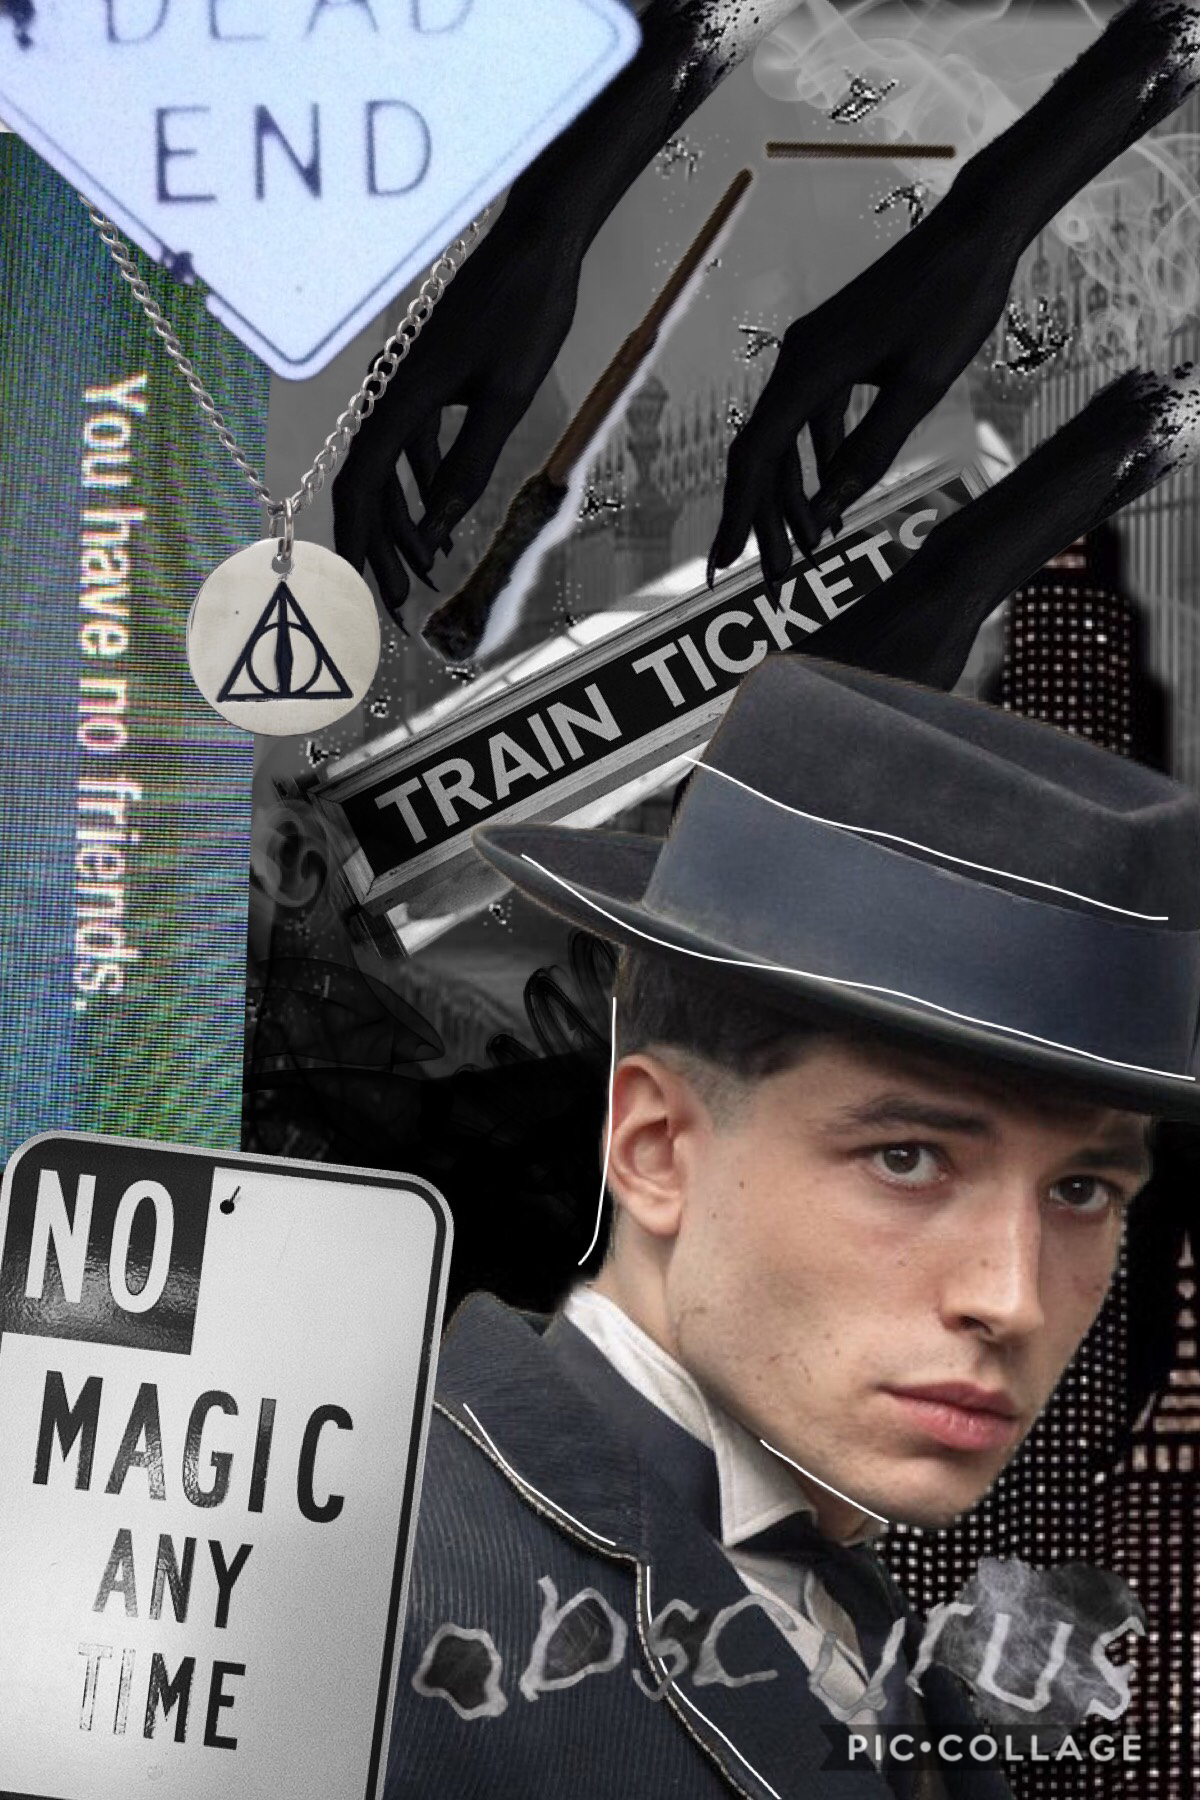 Credence collage.  I couldn't find any good quotes for him, oh well.